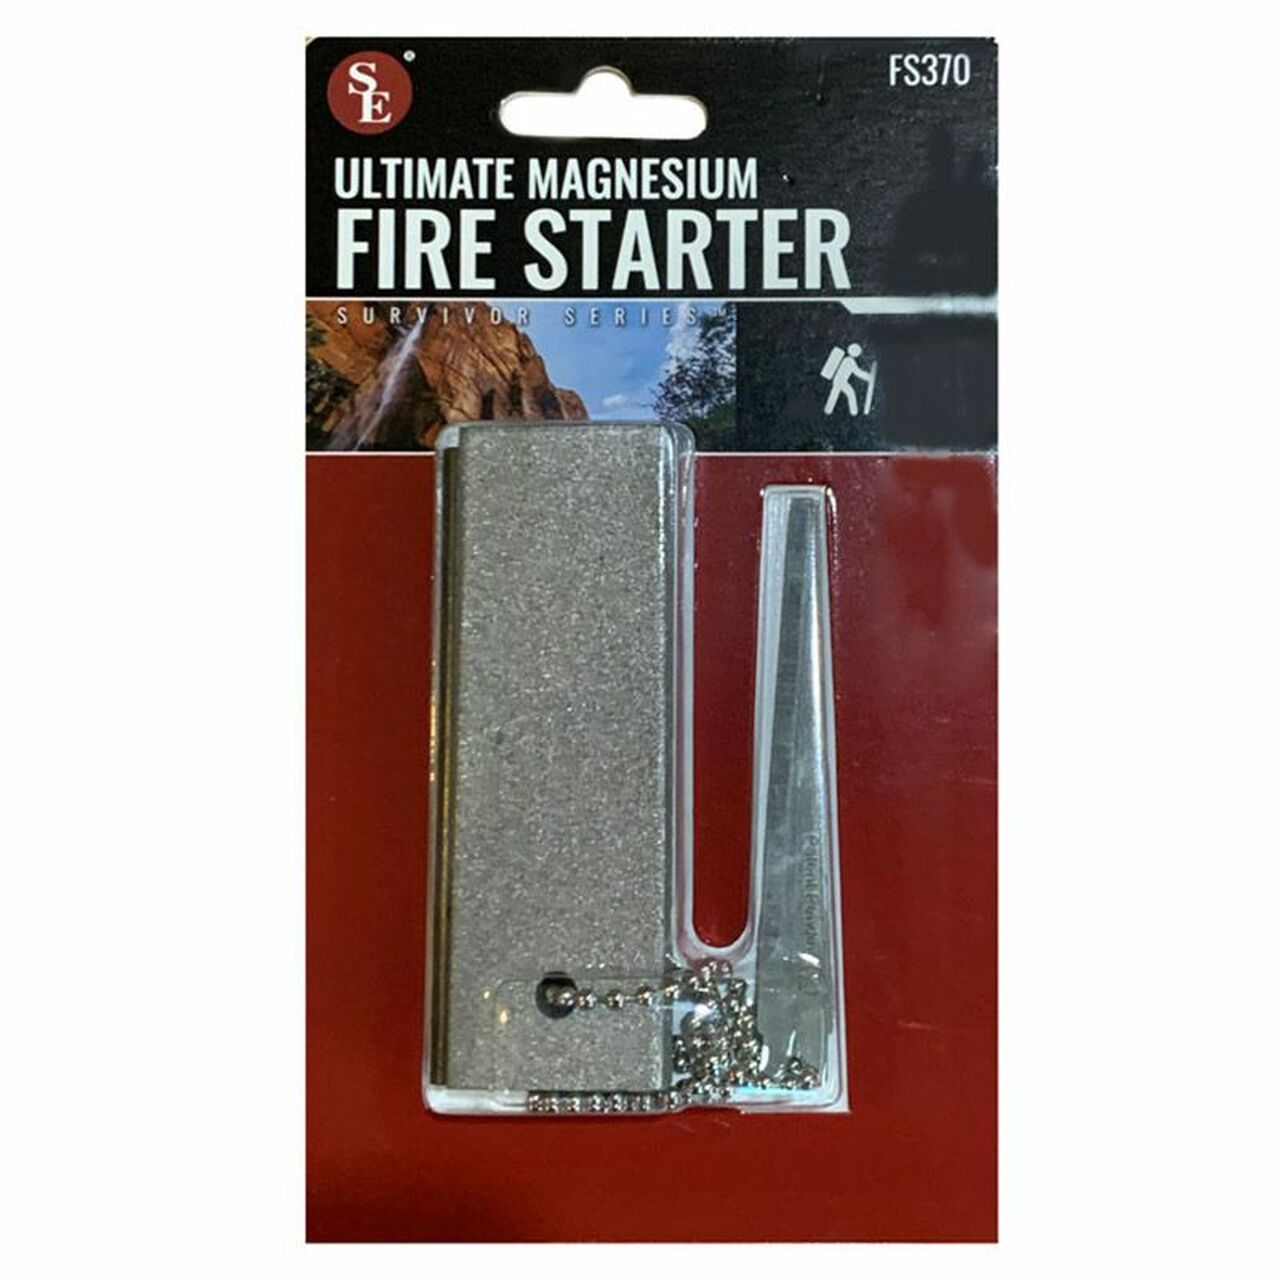 Ultimate Magnesium Fire Stater SONA SE